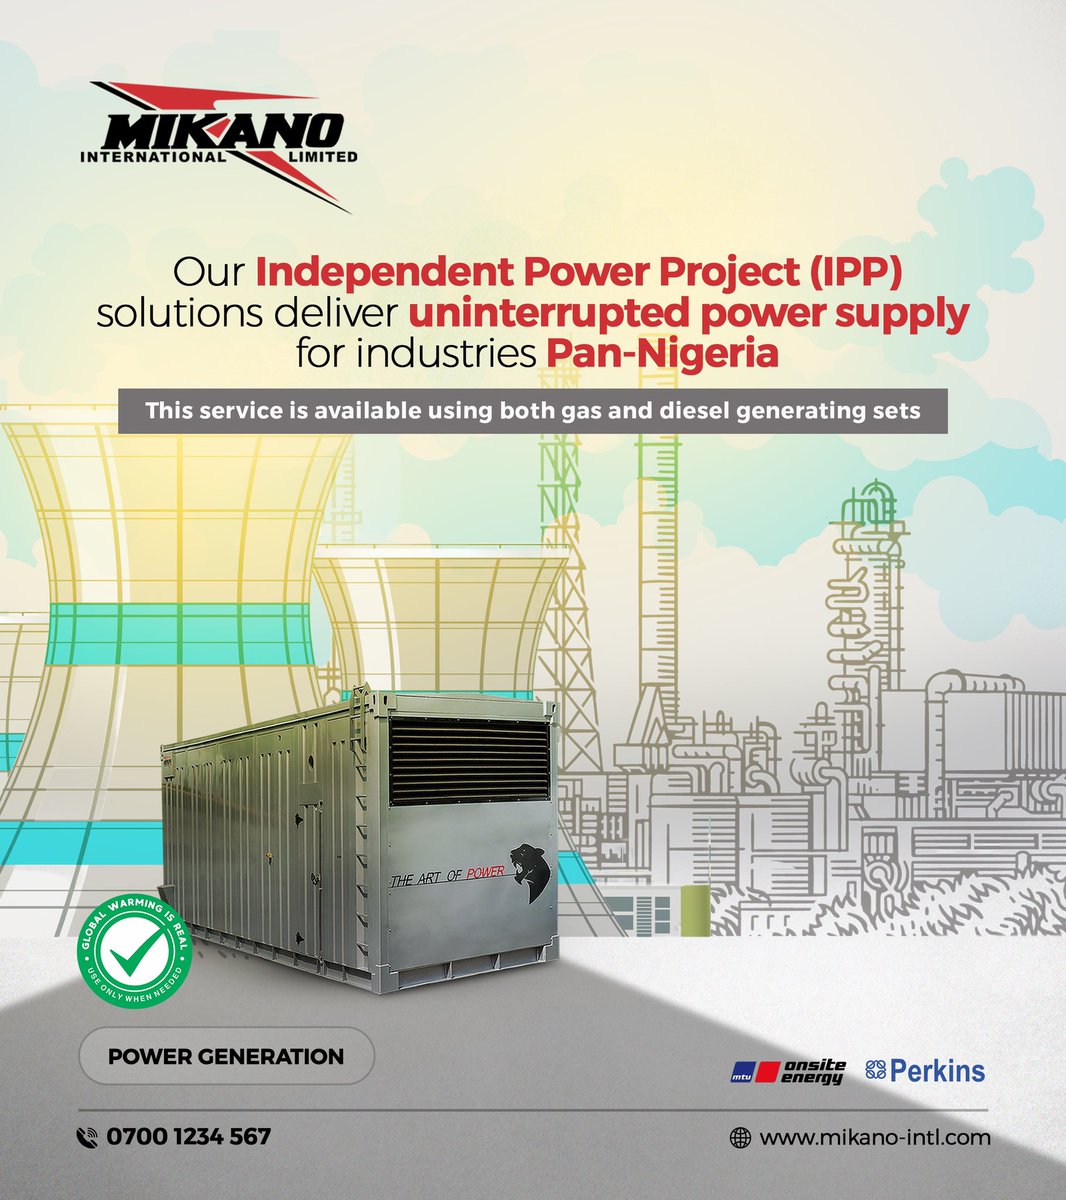 Enter into a world of reliable energy with our Independent Power Project (IPP) solution. Our turnkey solutions provide uninterrupted power supply for any required capacity in any industry. 

Kindly send us DM or call 07001234567 

#ReliableEnergy #UninterruptedPowerSupply #Power